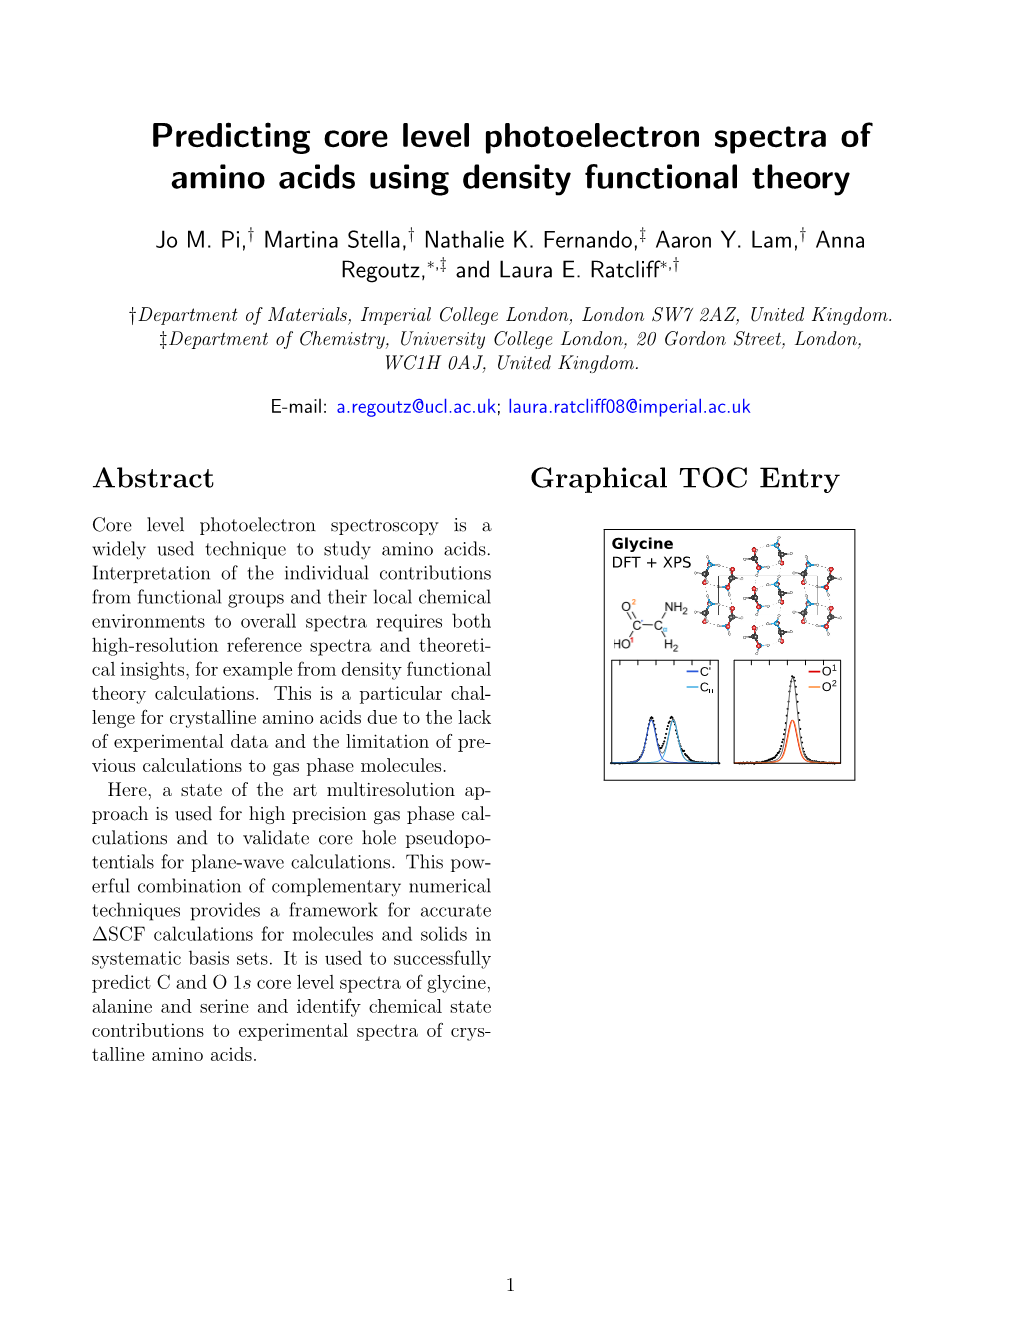 Predicting Core Level Photoelectron Spectra of Amino Acids Using Density Functional Theory